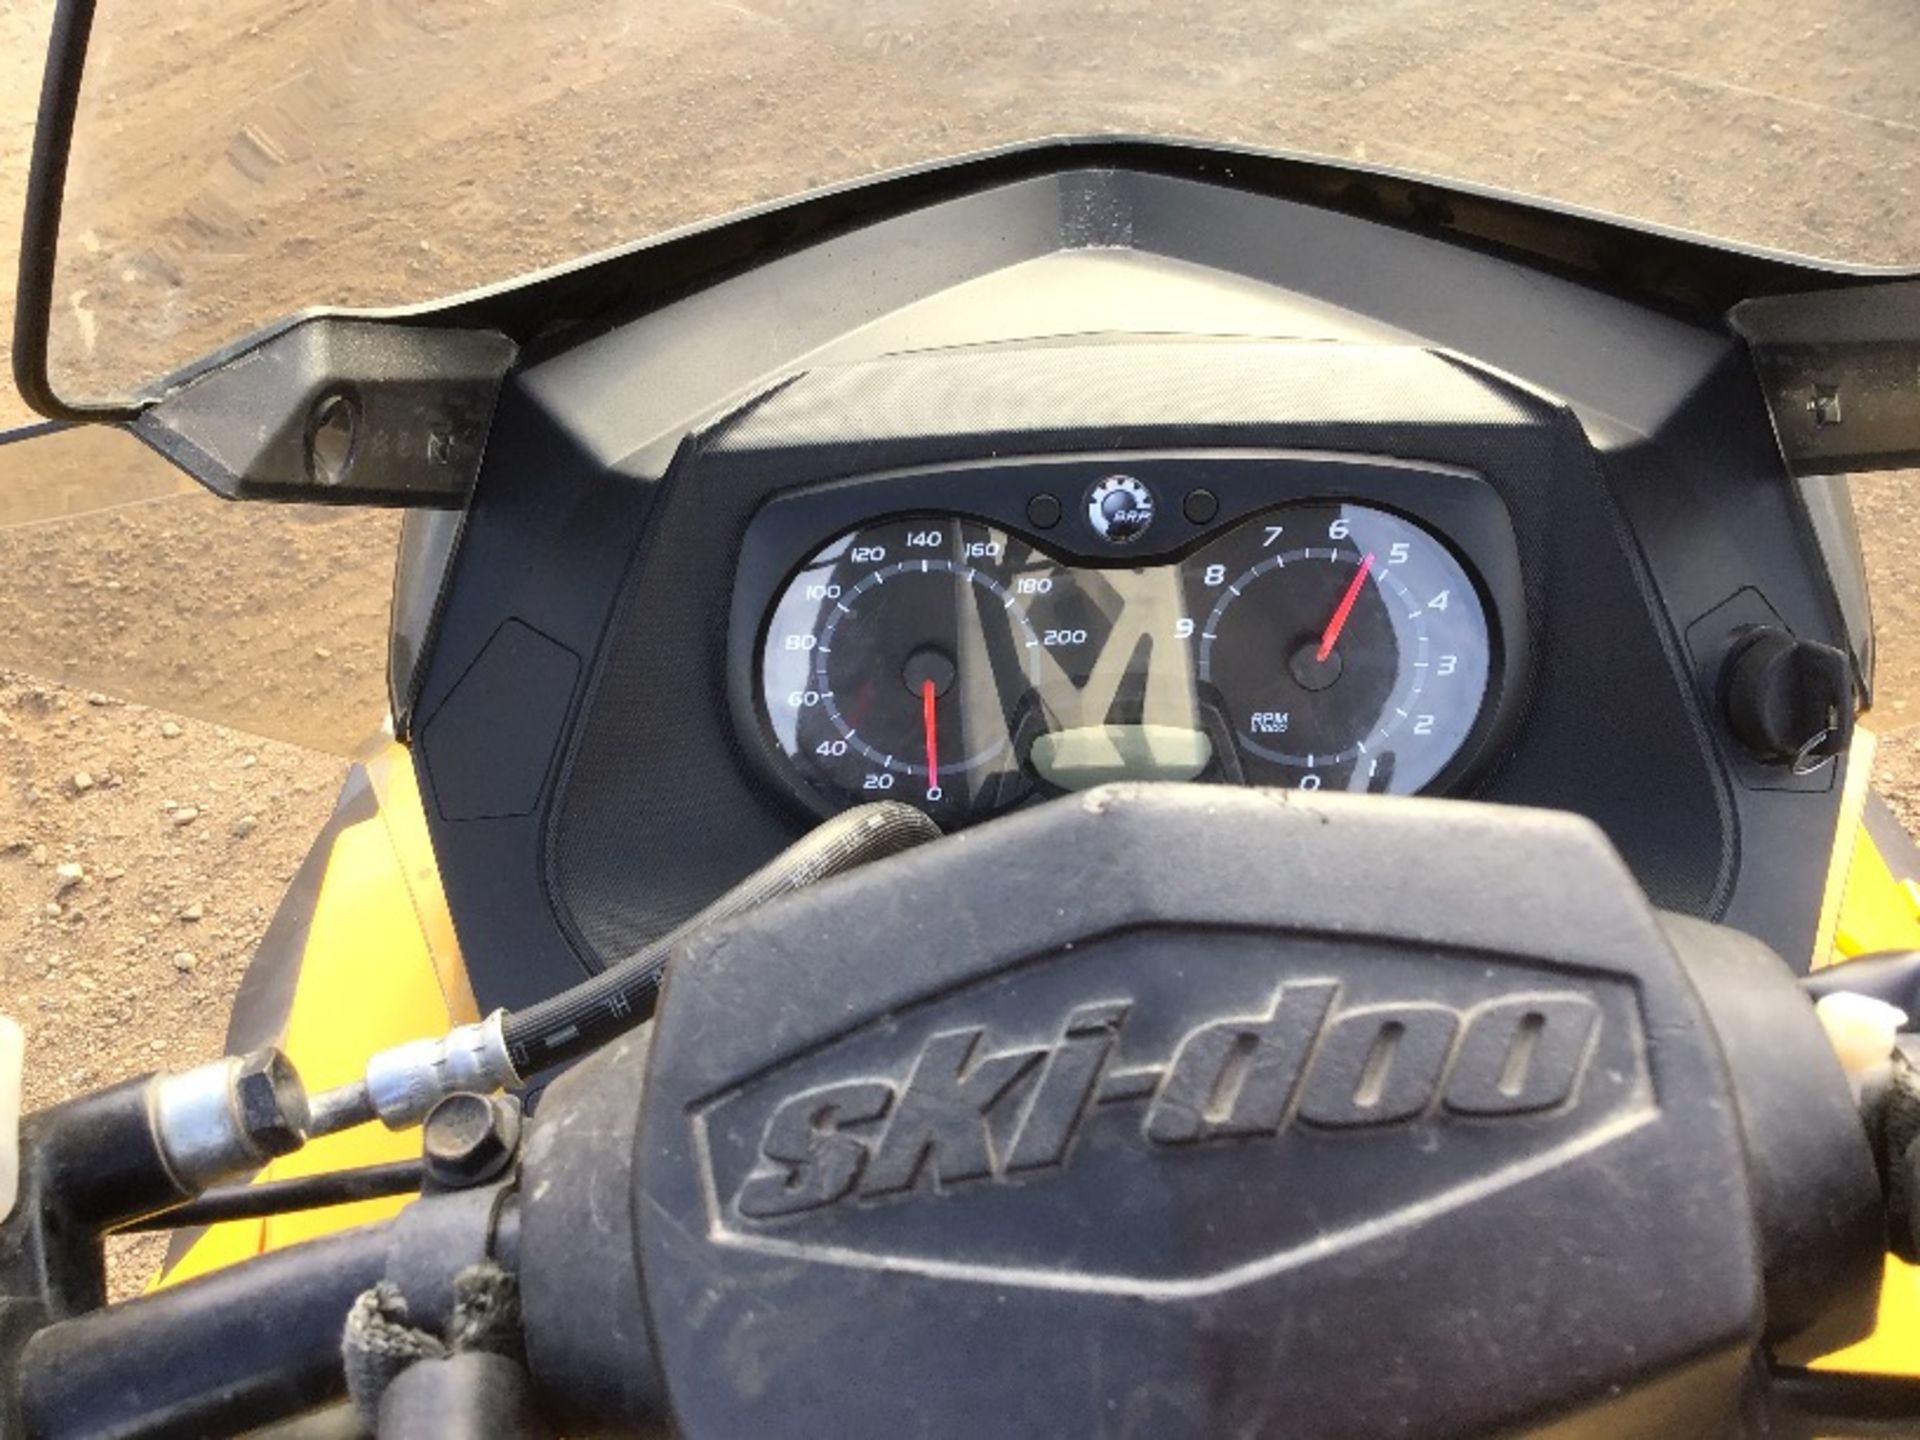 2010 Skidoo Tundra 550 Sport Snowmobile 7040km about 1000 K on new track + rebuilt engine, new crank - Image 4 of 5